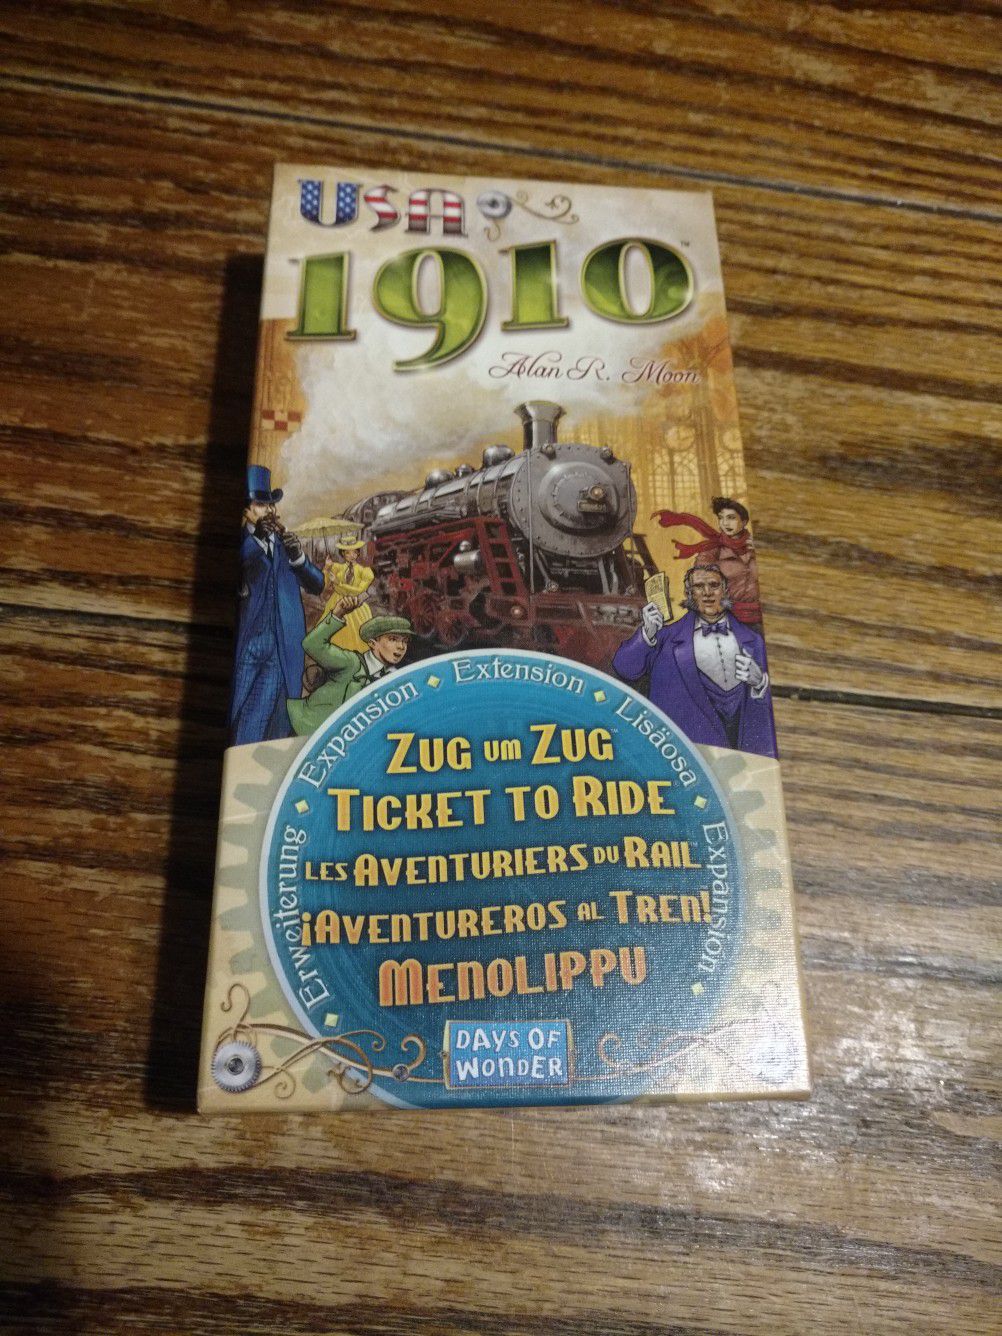 Ticket to Ride board game 1910 USA expansion